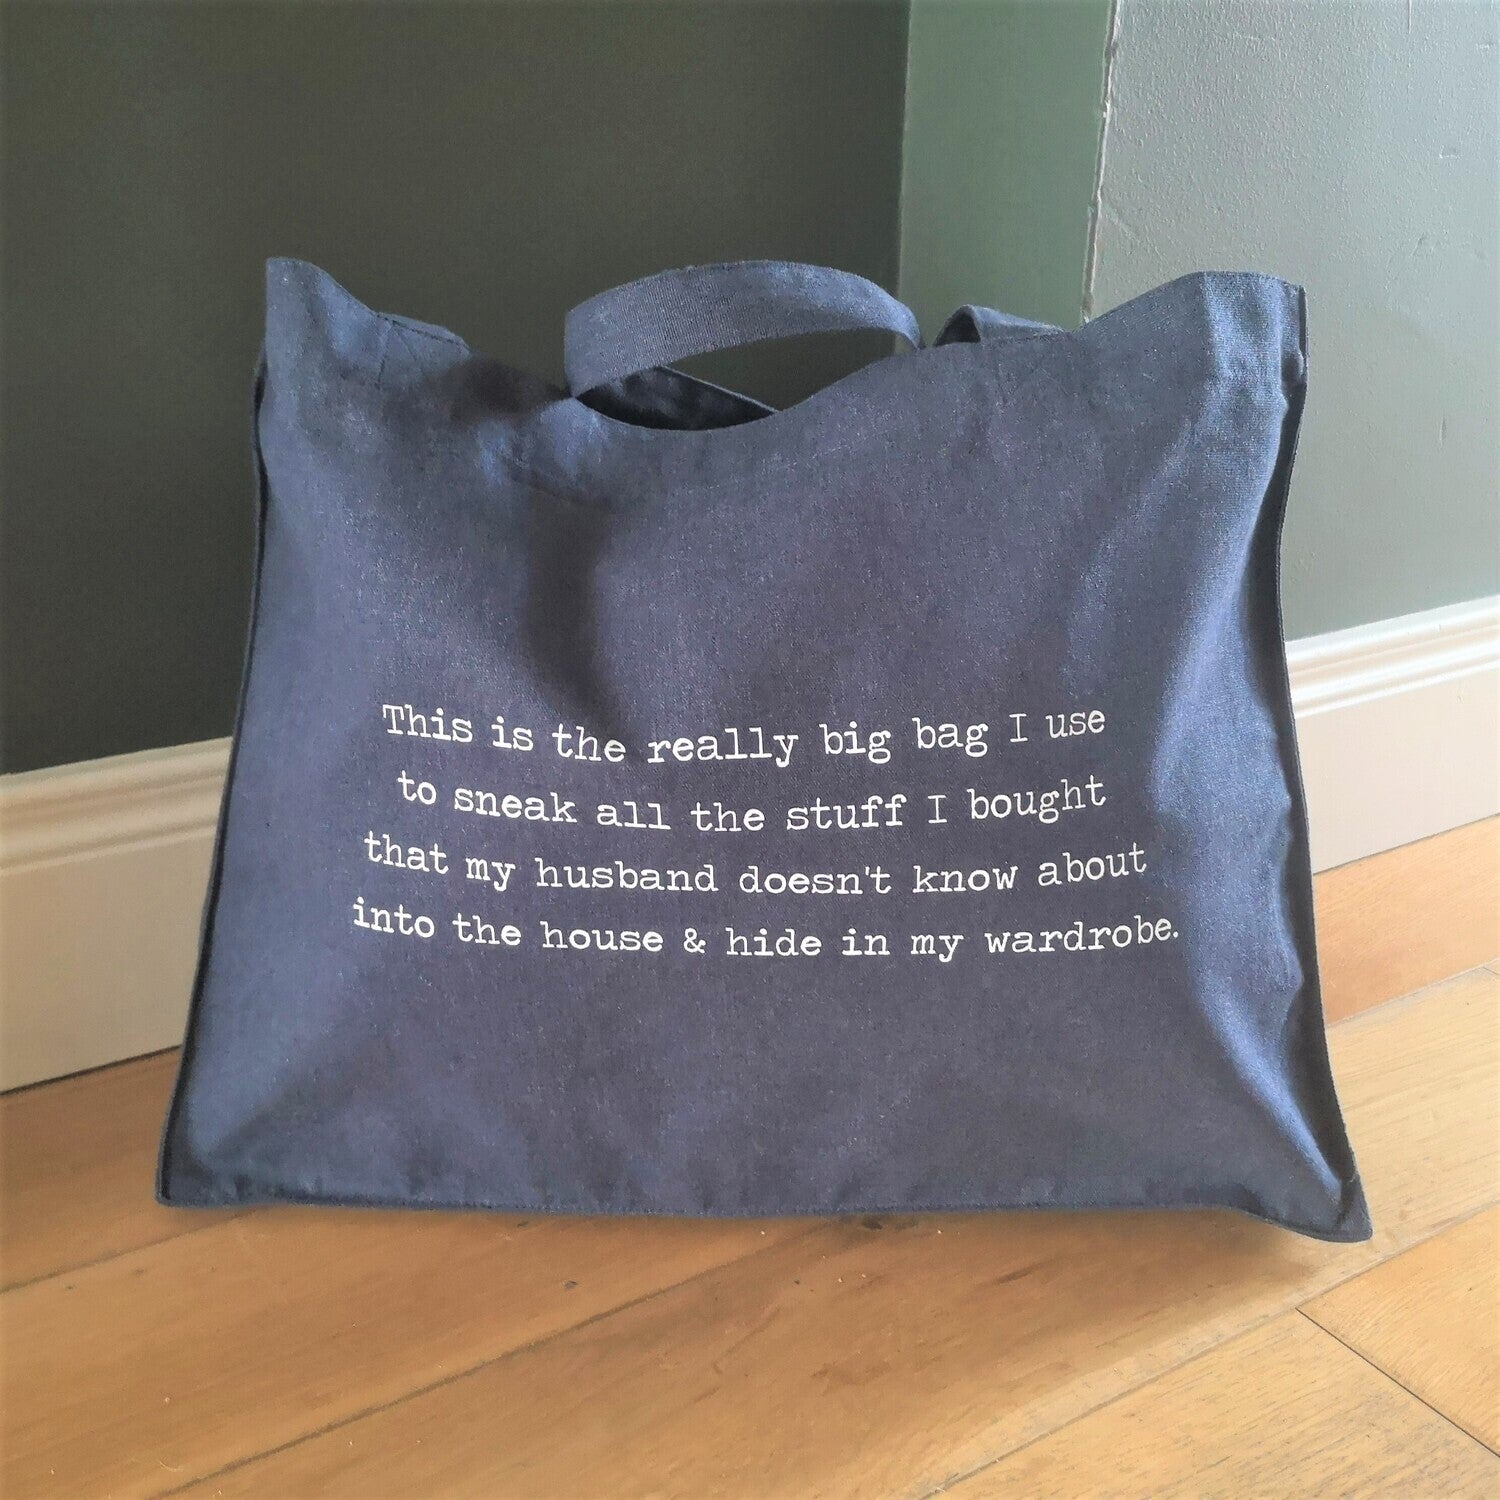 Another view of a large midnight blue organic cotton tote with the following text on it - This is the really big bag I use to sneak all the stuff I bought that my husband doesn't know about into the house & hide in my wardrobe.